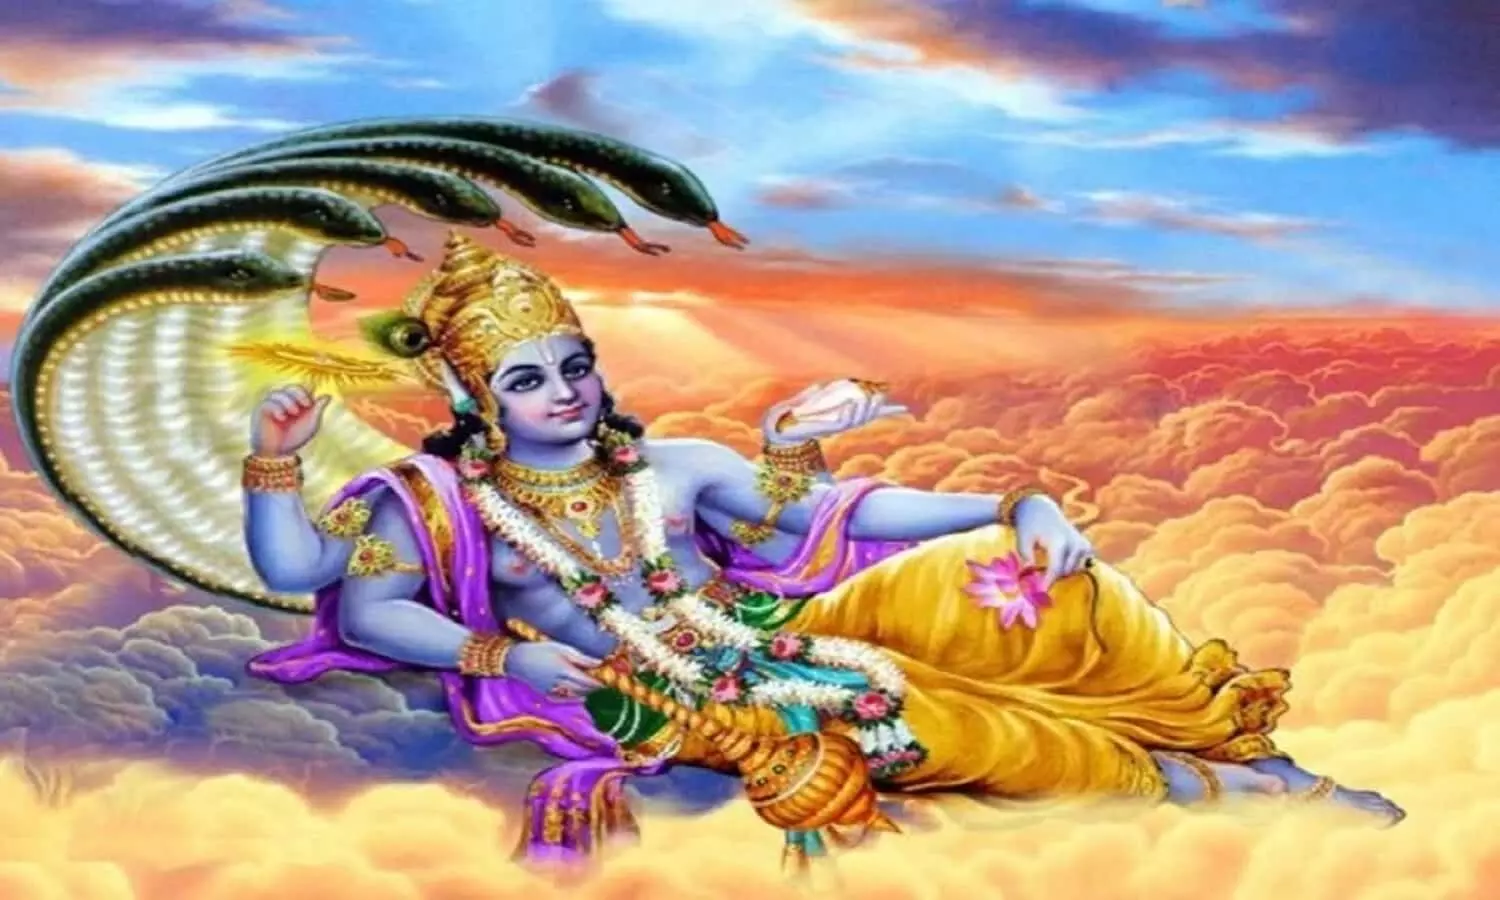 Today morning, while doing puja, when I closed my eyes to offer prayers, I  got a vision of Lord Vishnu's image. This has never happened to me before.  What could this actually